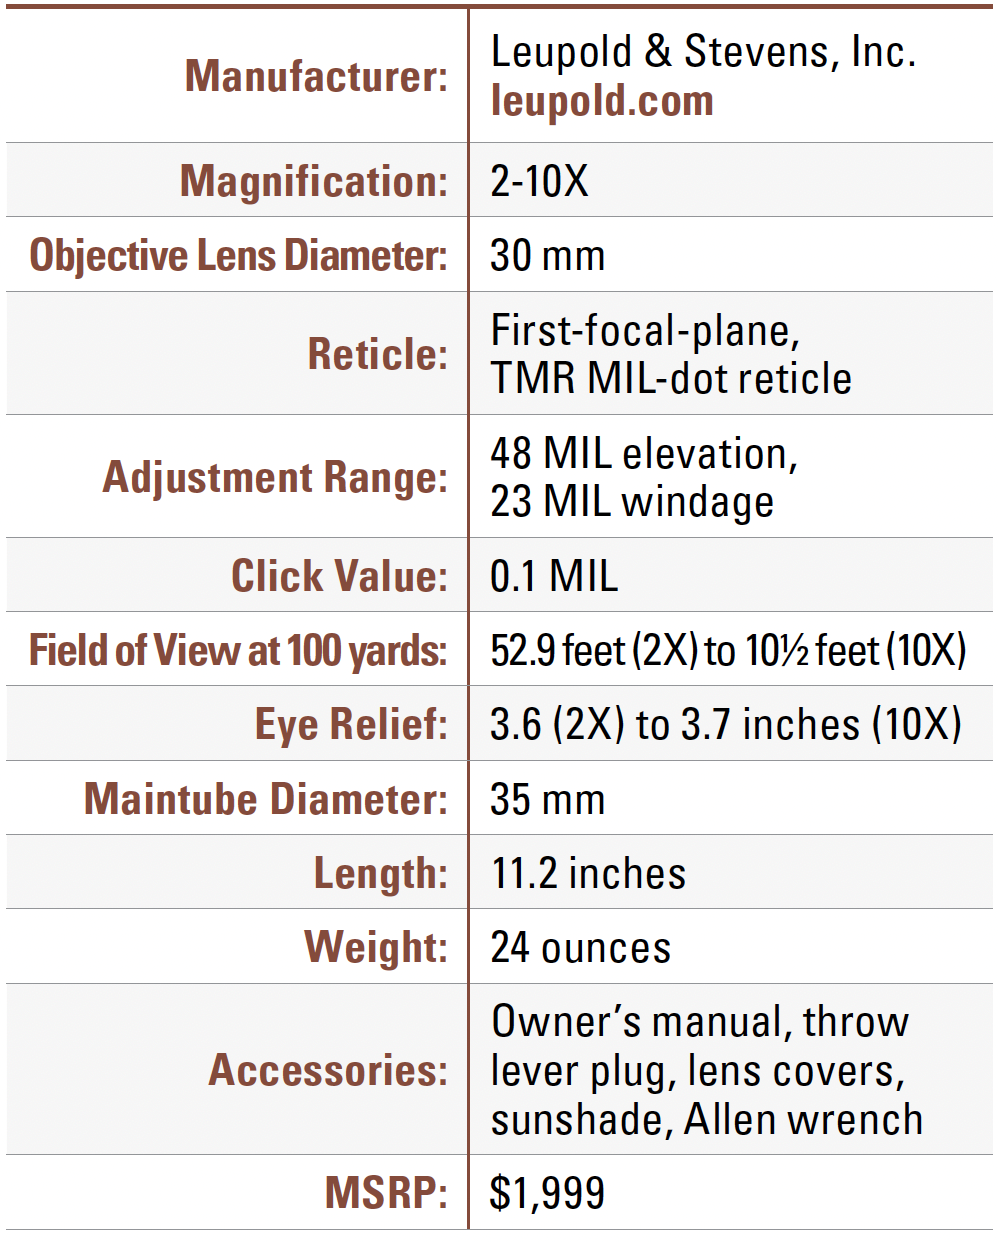 Leupold Mark 5HD 2-10X 30 mm specifications